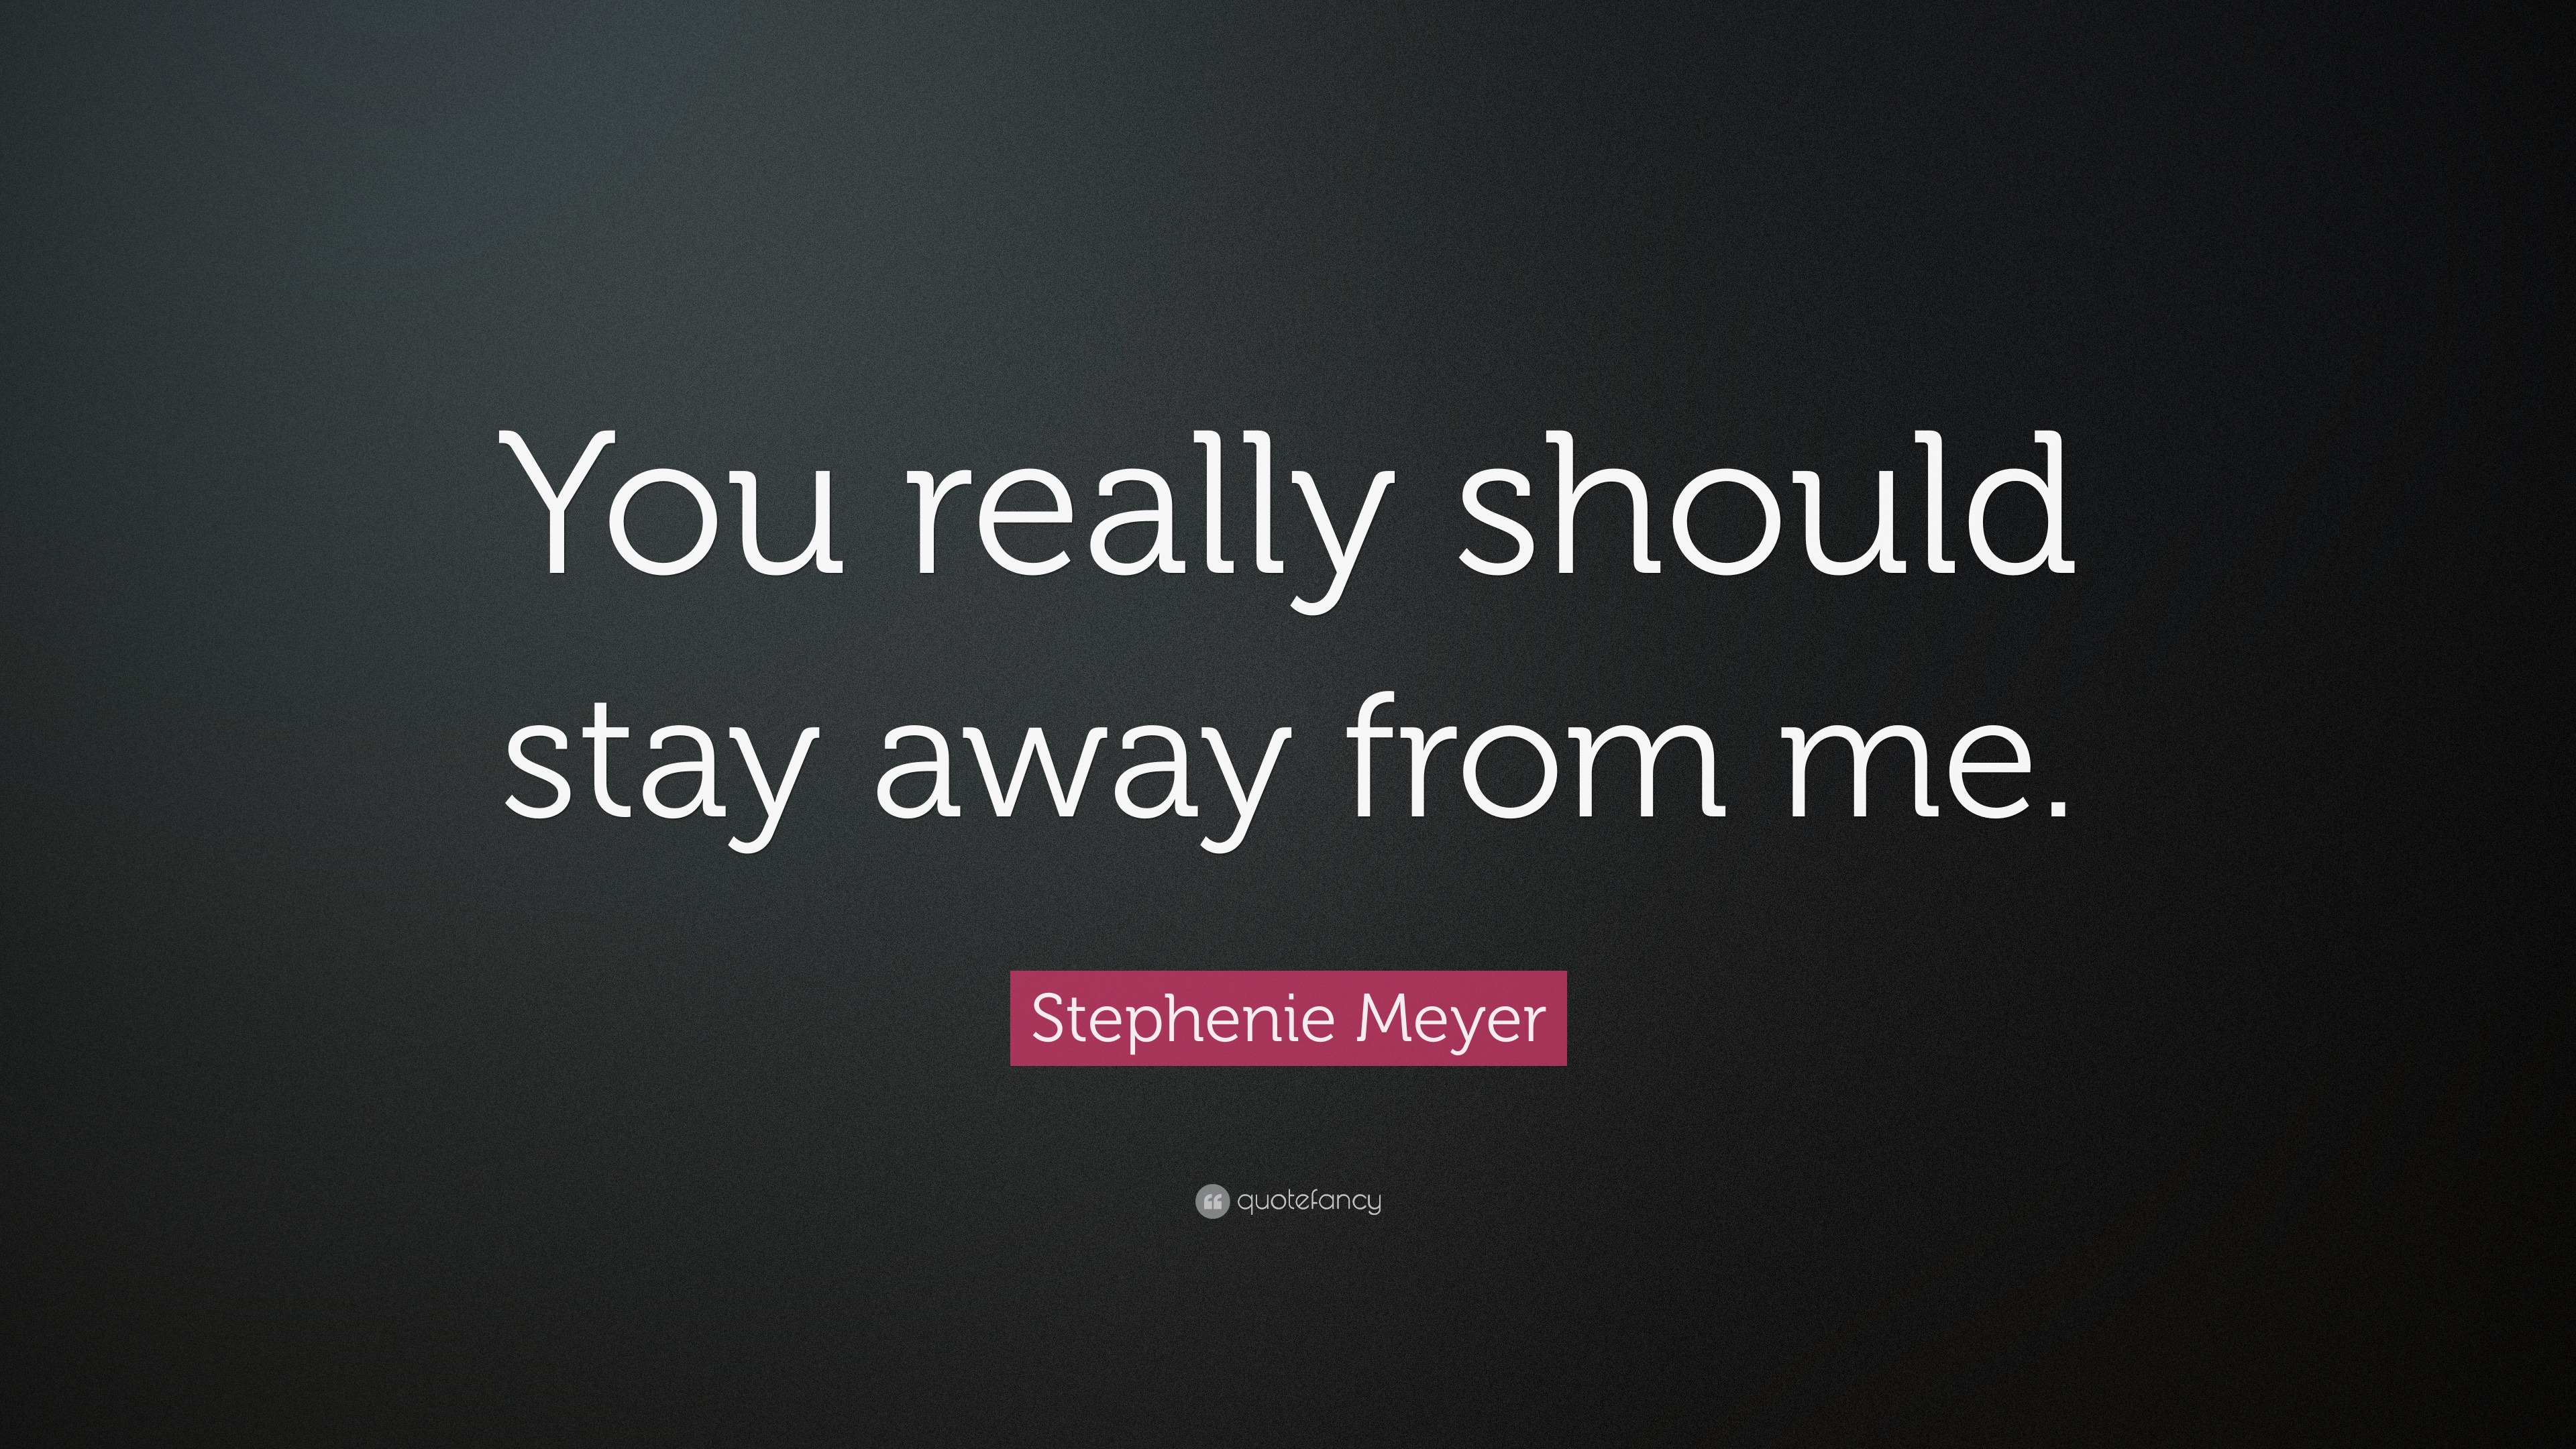 Stephenie Meyer Quote: “You Really Should Stay Away From Me.”